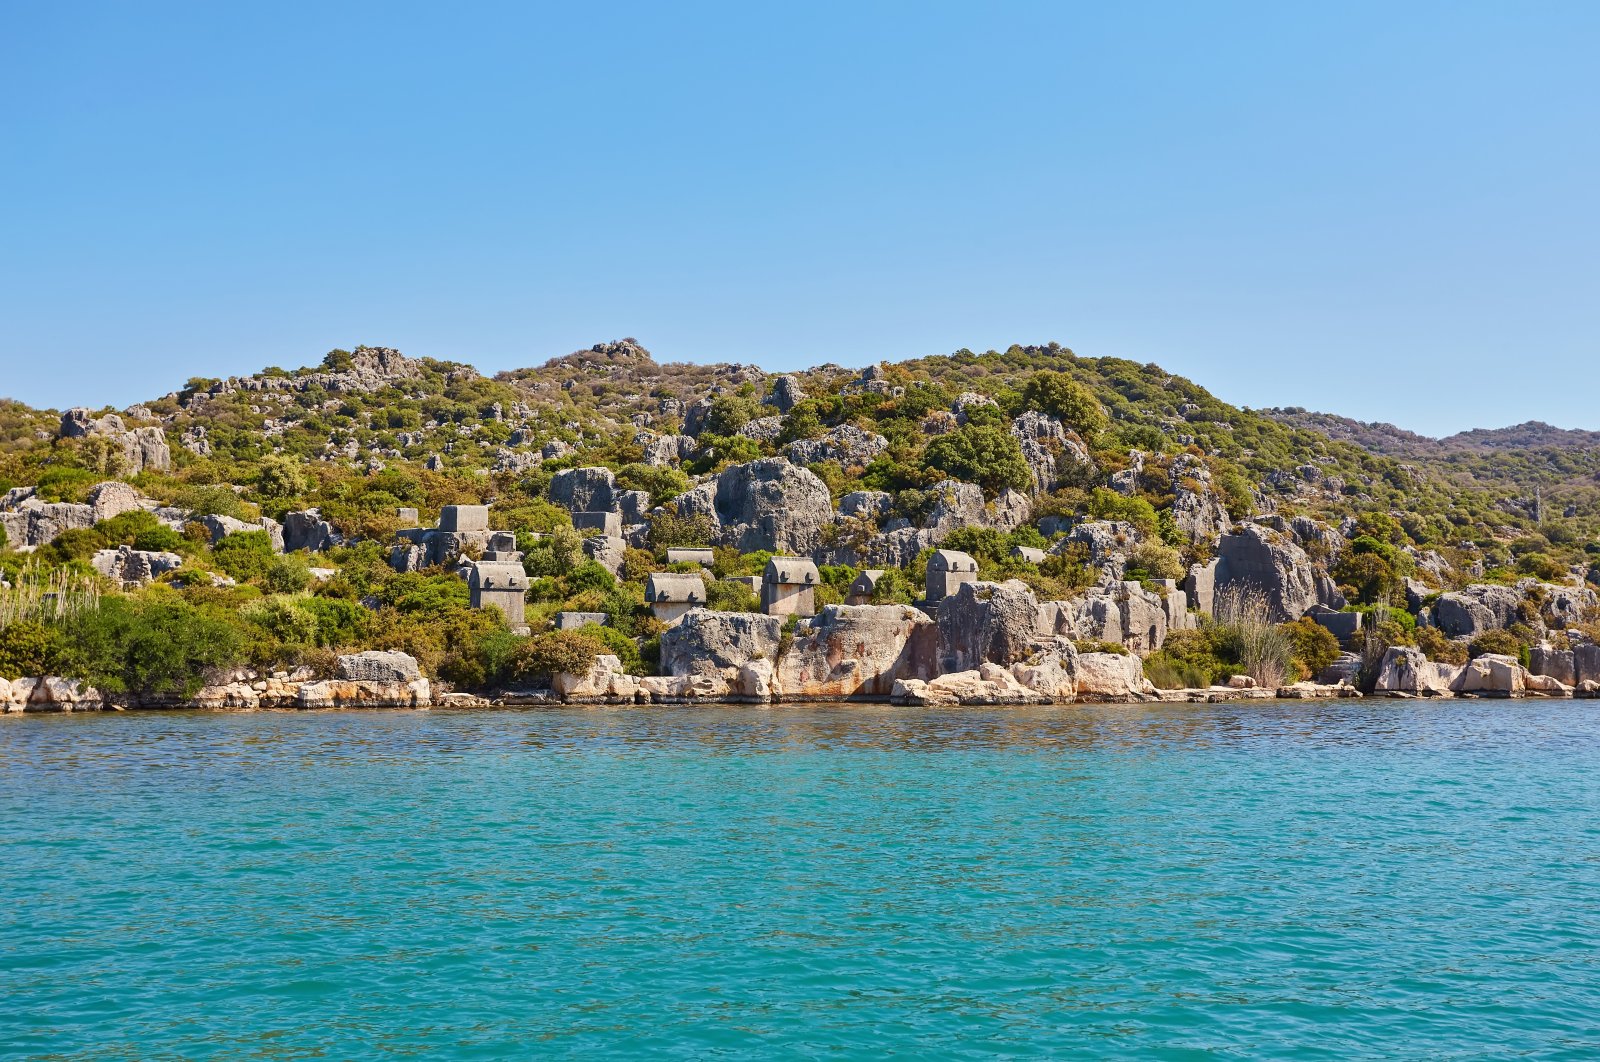 A view of the coast of Kekova island in the Mediterranean sea, which is picturesque with the ruins of the ancient Lycian town of Aperlai. (Shutterstock Photo)